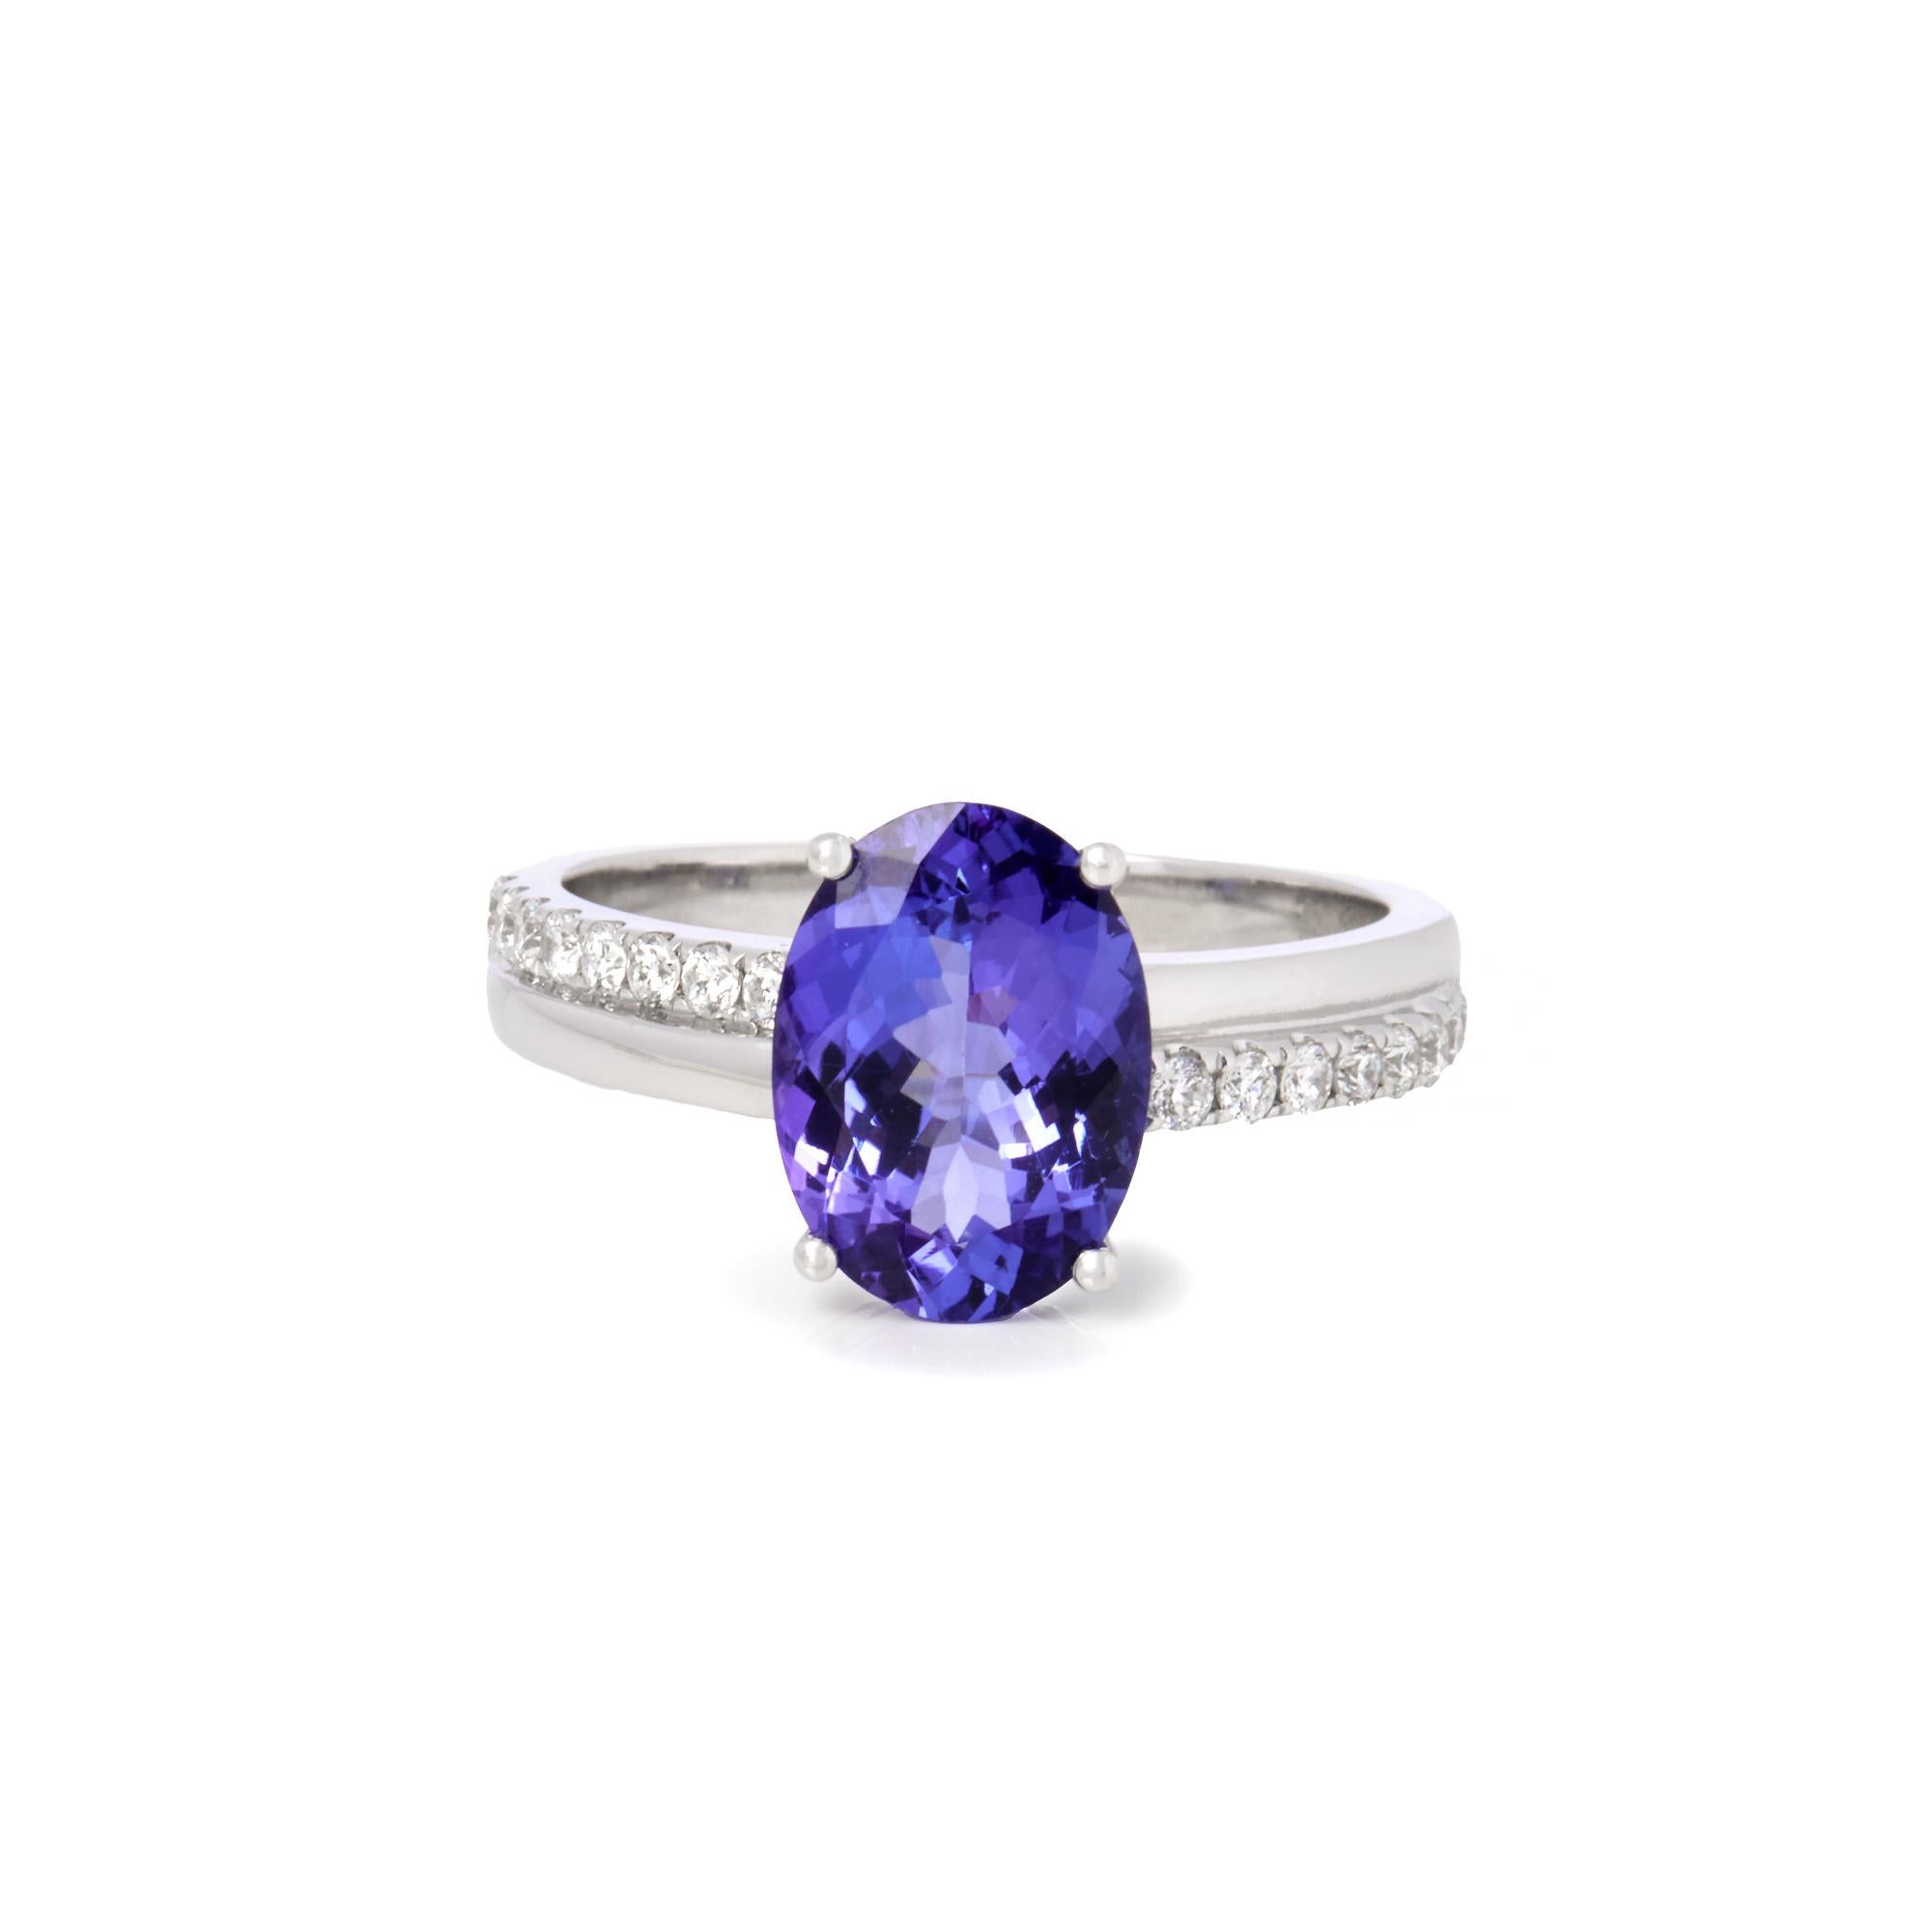 David Jerome Certified 2.58ct Oval Cut Tanzanite and Diamond Ring For Sale 1